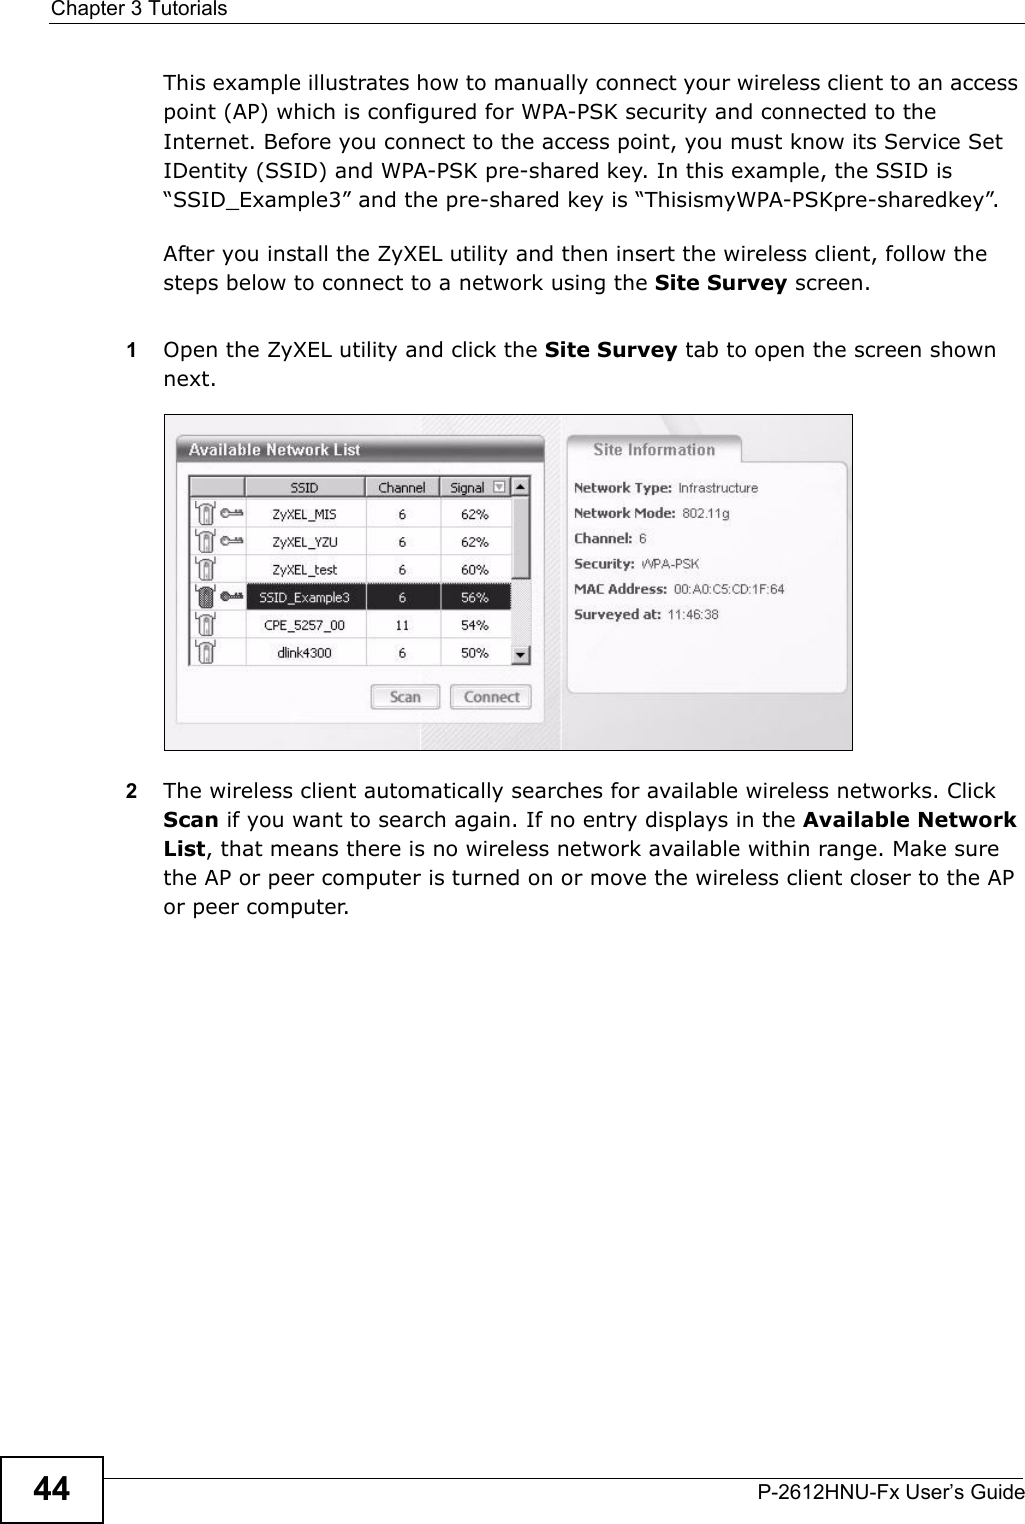 Chapter 3 TutorialsP-2612HNU-Fx User’s Guide44This example illustrates how to manually connect your wireless client to an accesspoint (AP) which is configured for WPA-PSK security and connected to the Internet. Before you connect to the access point, you must know its Service SetIDentity (SSID) and WPA-PSK pre-shared key. In this example, the SSID is“SSID_Example3” and the pre-shared key is “ThisismyWPA-PSKpre-sharedkey”.After you install the ZyXEL utility and then insert the wireless client, follow the steps below to connect to a network using the Site Survey screen. 1Open the ZyXEL utility and click the Site Survey tab to open the screen shown next.Tutorial: Site Survey2The wireless client automatically searches for available wireless networks. Click Scan if you want to search again. If no entry displays in the Available Network List, that means there is no wireless network available within range. Make surethe AP or peer computer is turned on or move the wireless client closer to the AP or peer computer.